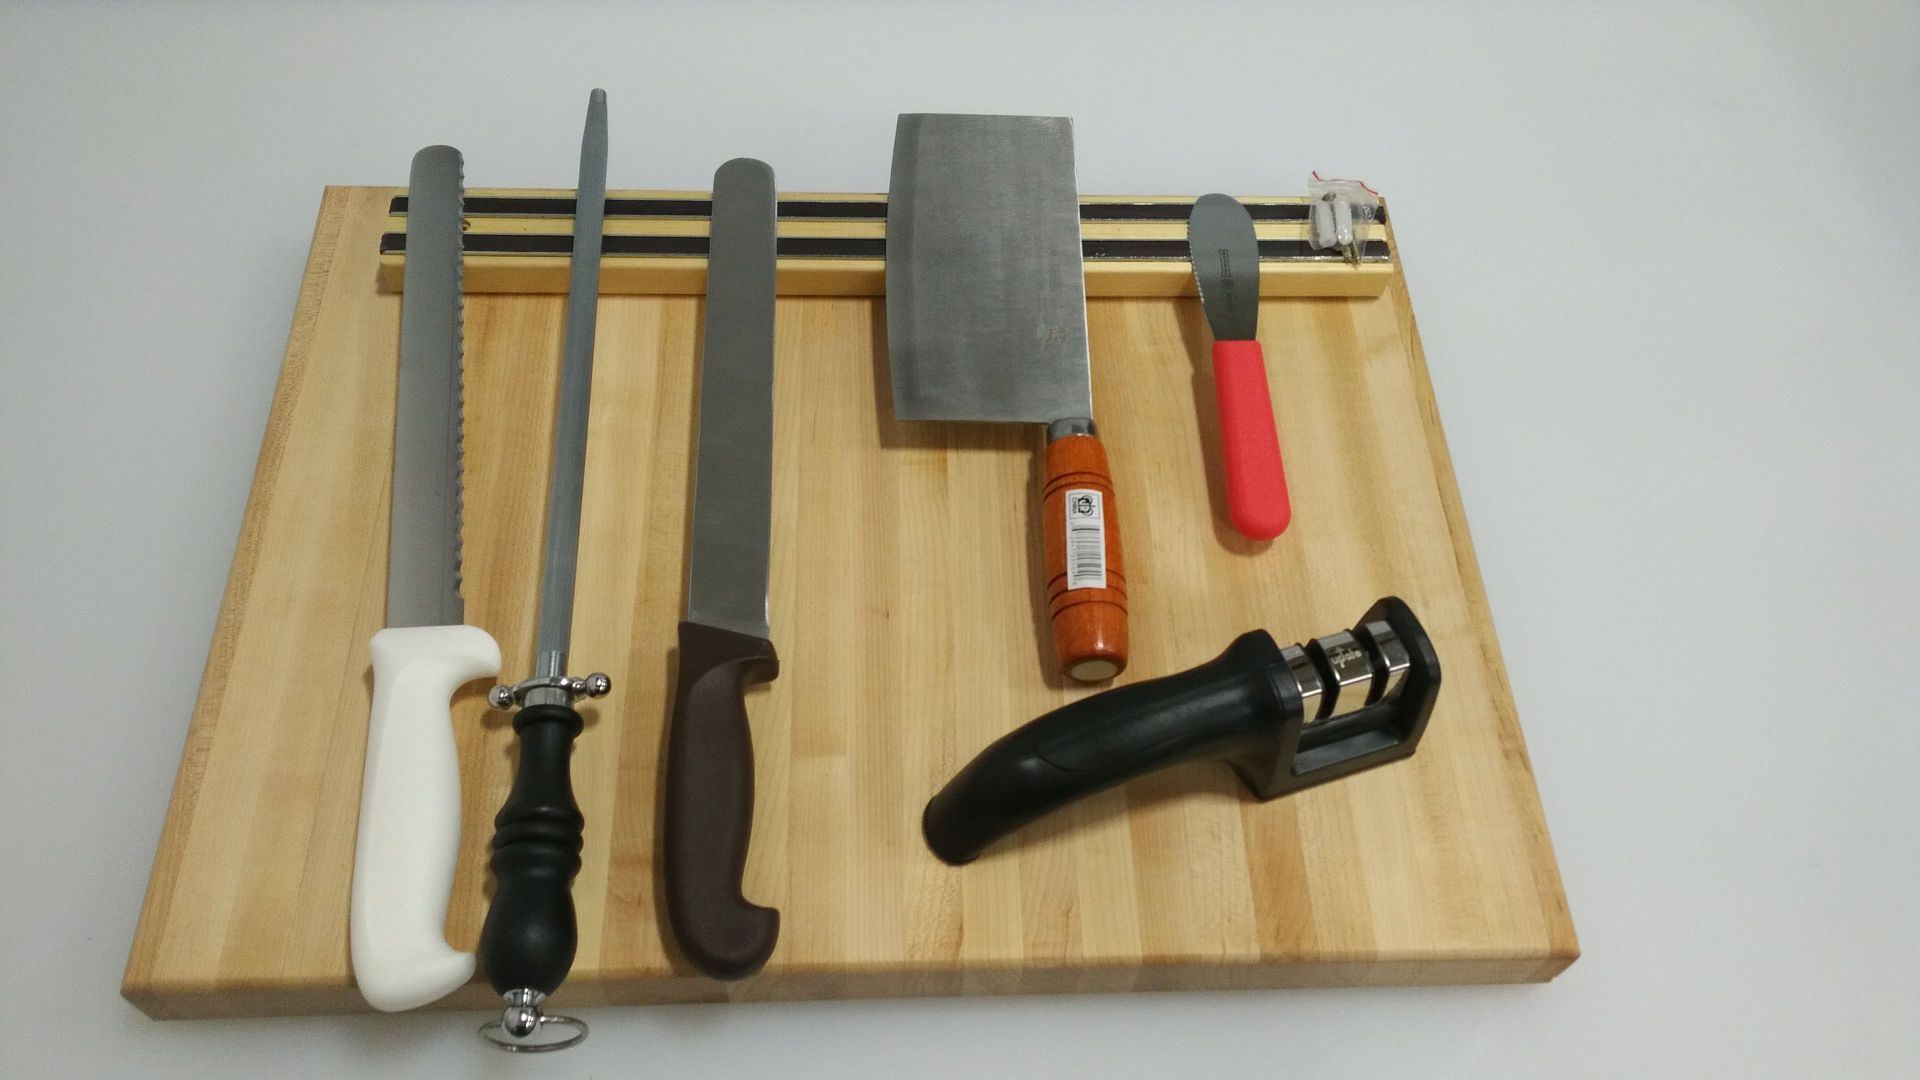 Auctioneer Special - Knives & Cutting Board 20" x 15" - Image 2 of 5